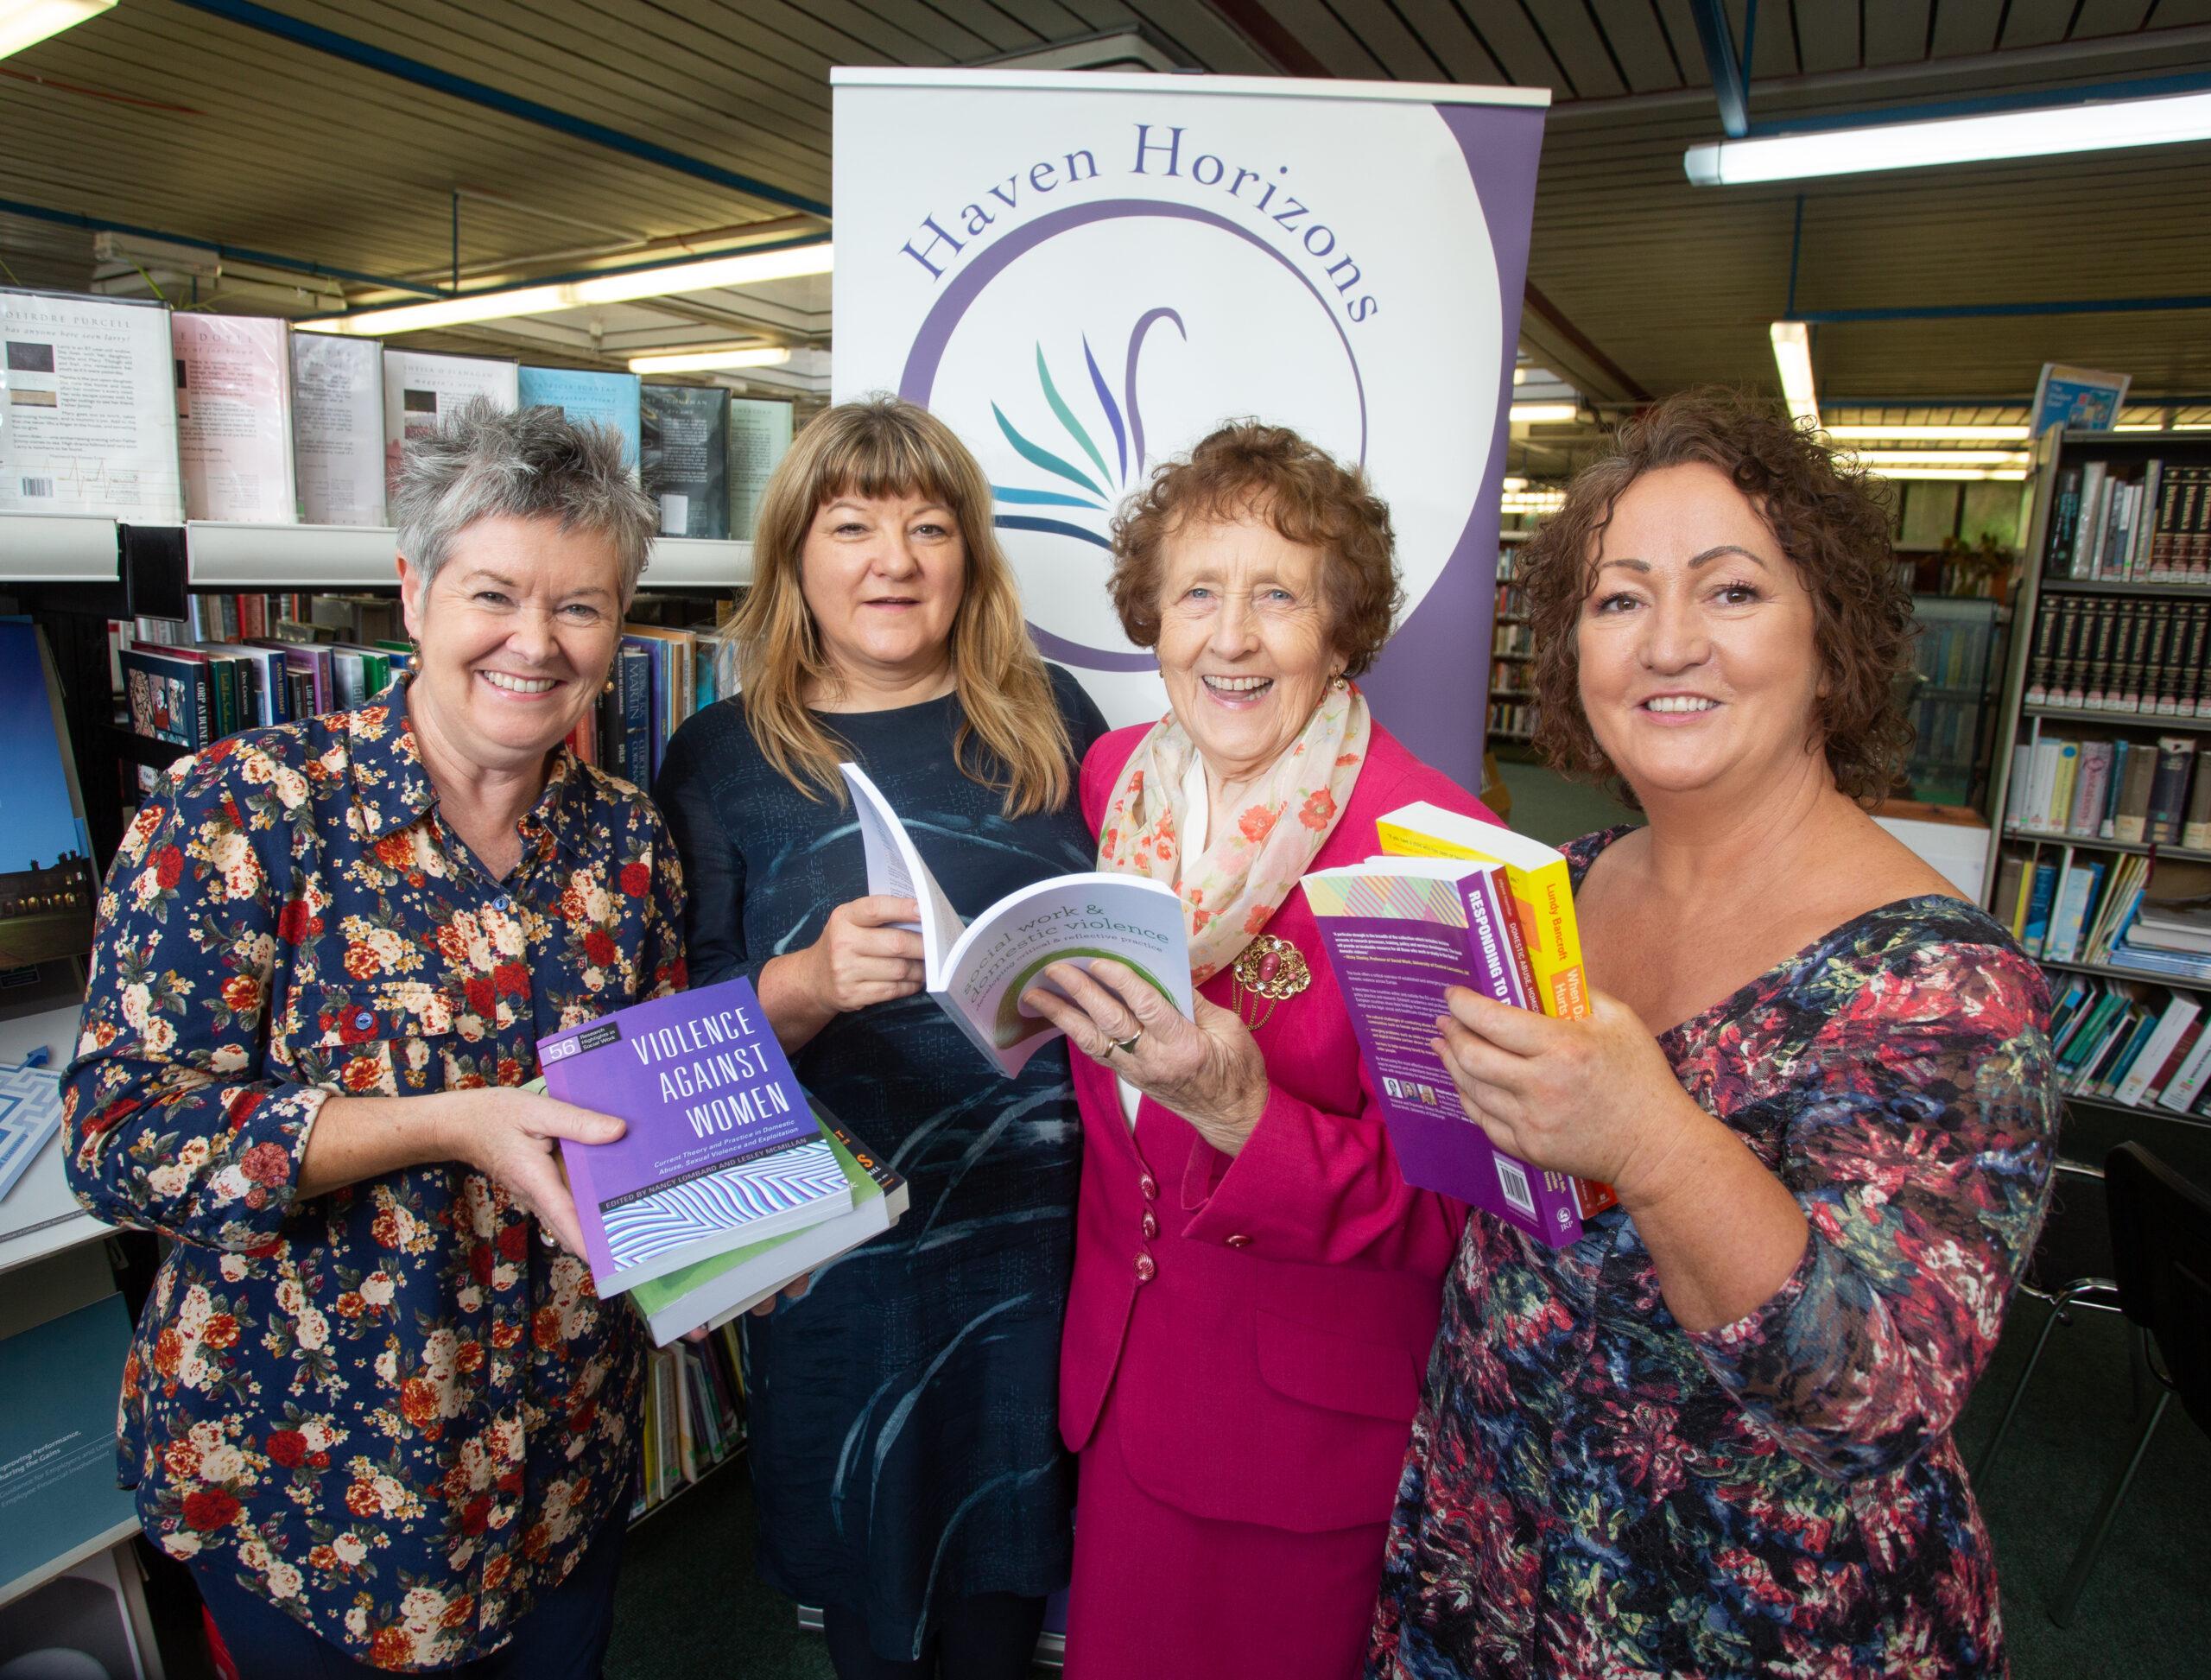 Press Release – Haven Horizons’ Book Donations to Libraries Ireland and LIT as part of the ‘16 Days’ Campaign (2018)